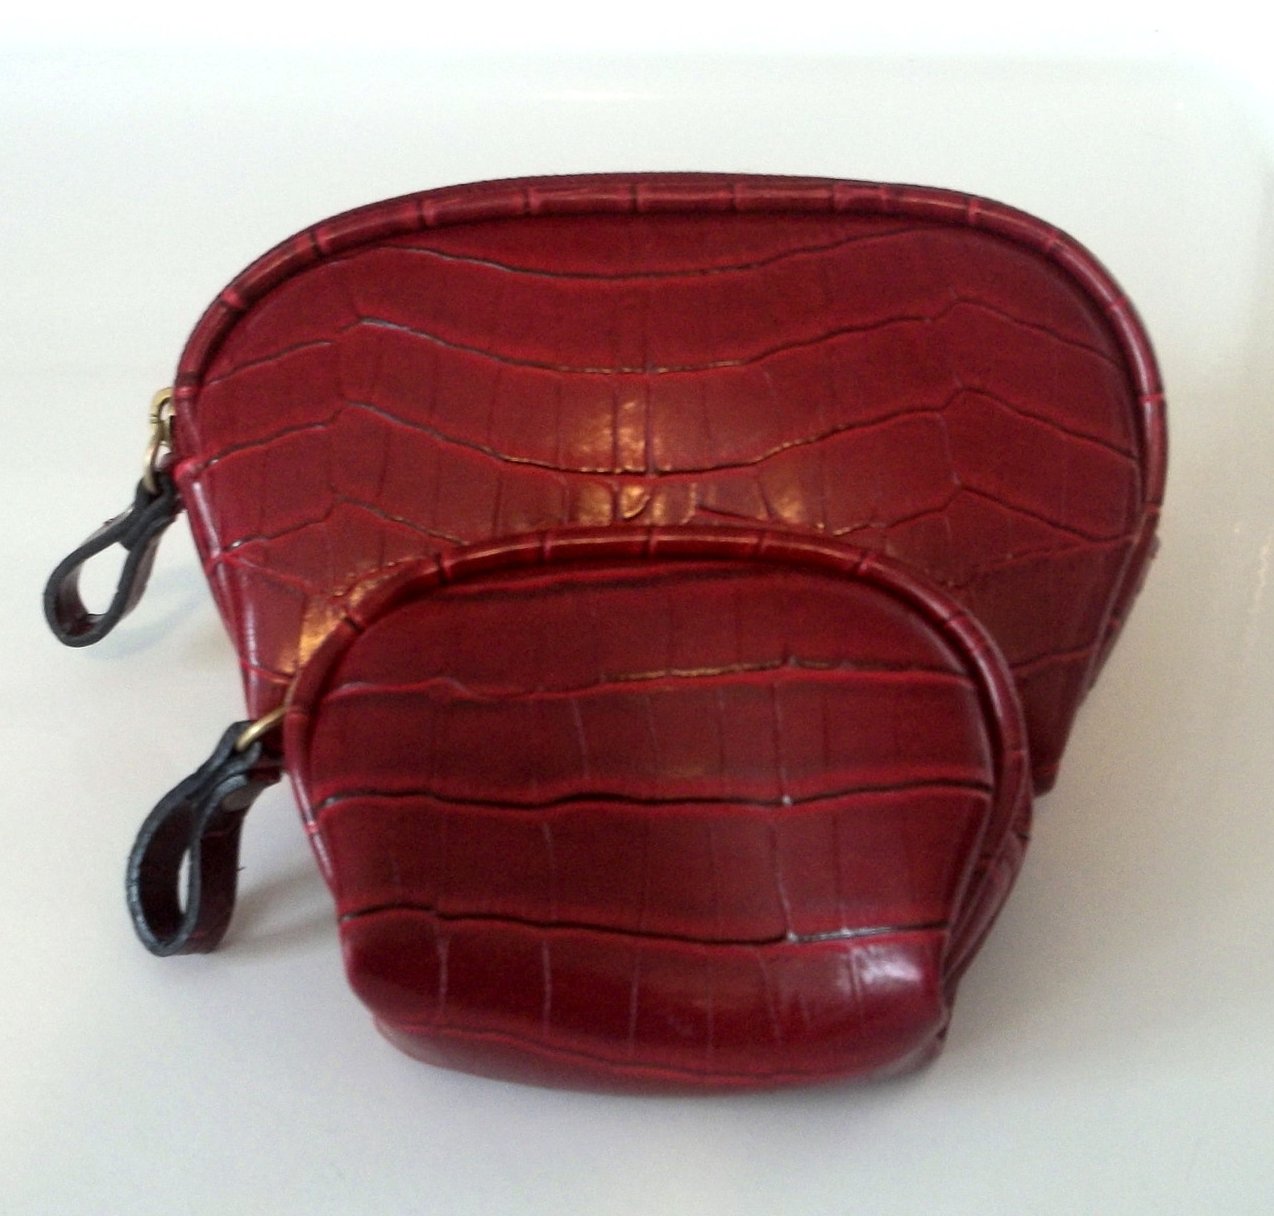 Cosmetic Bag and Coin Purse 2 Pc Set Red Crocodile Print Red